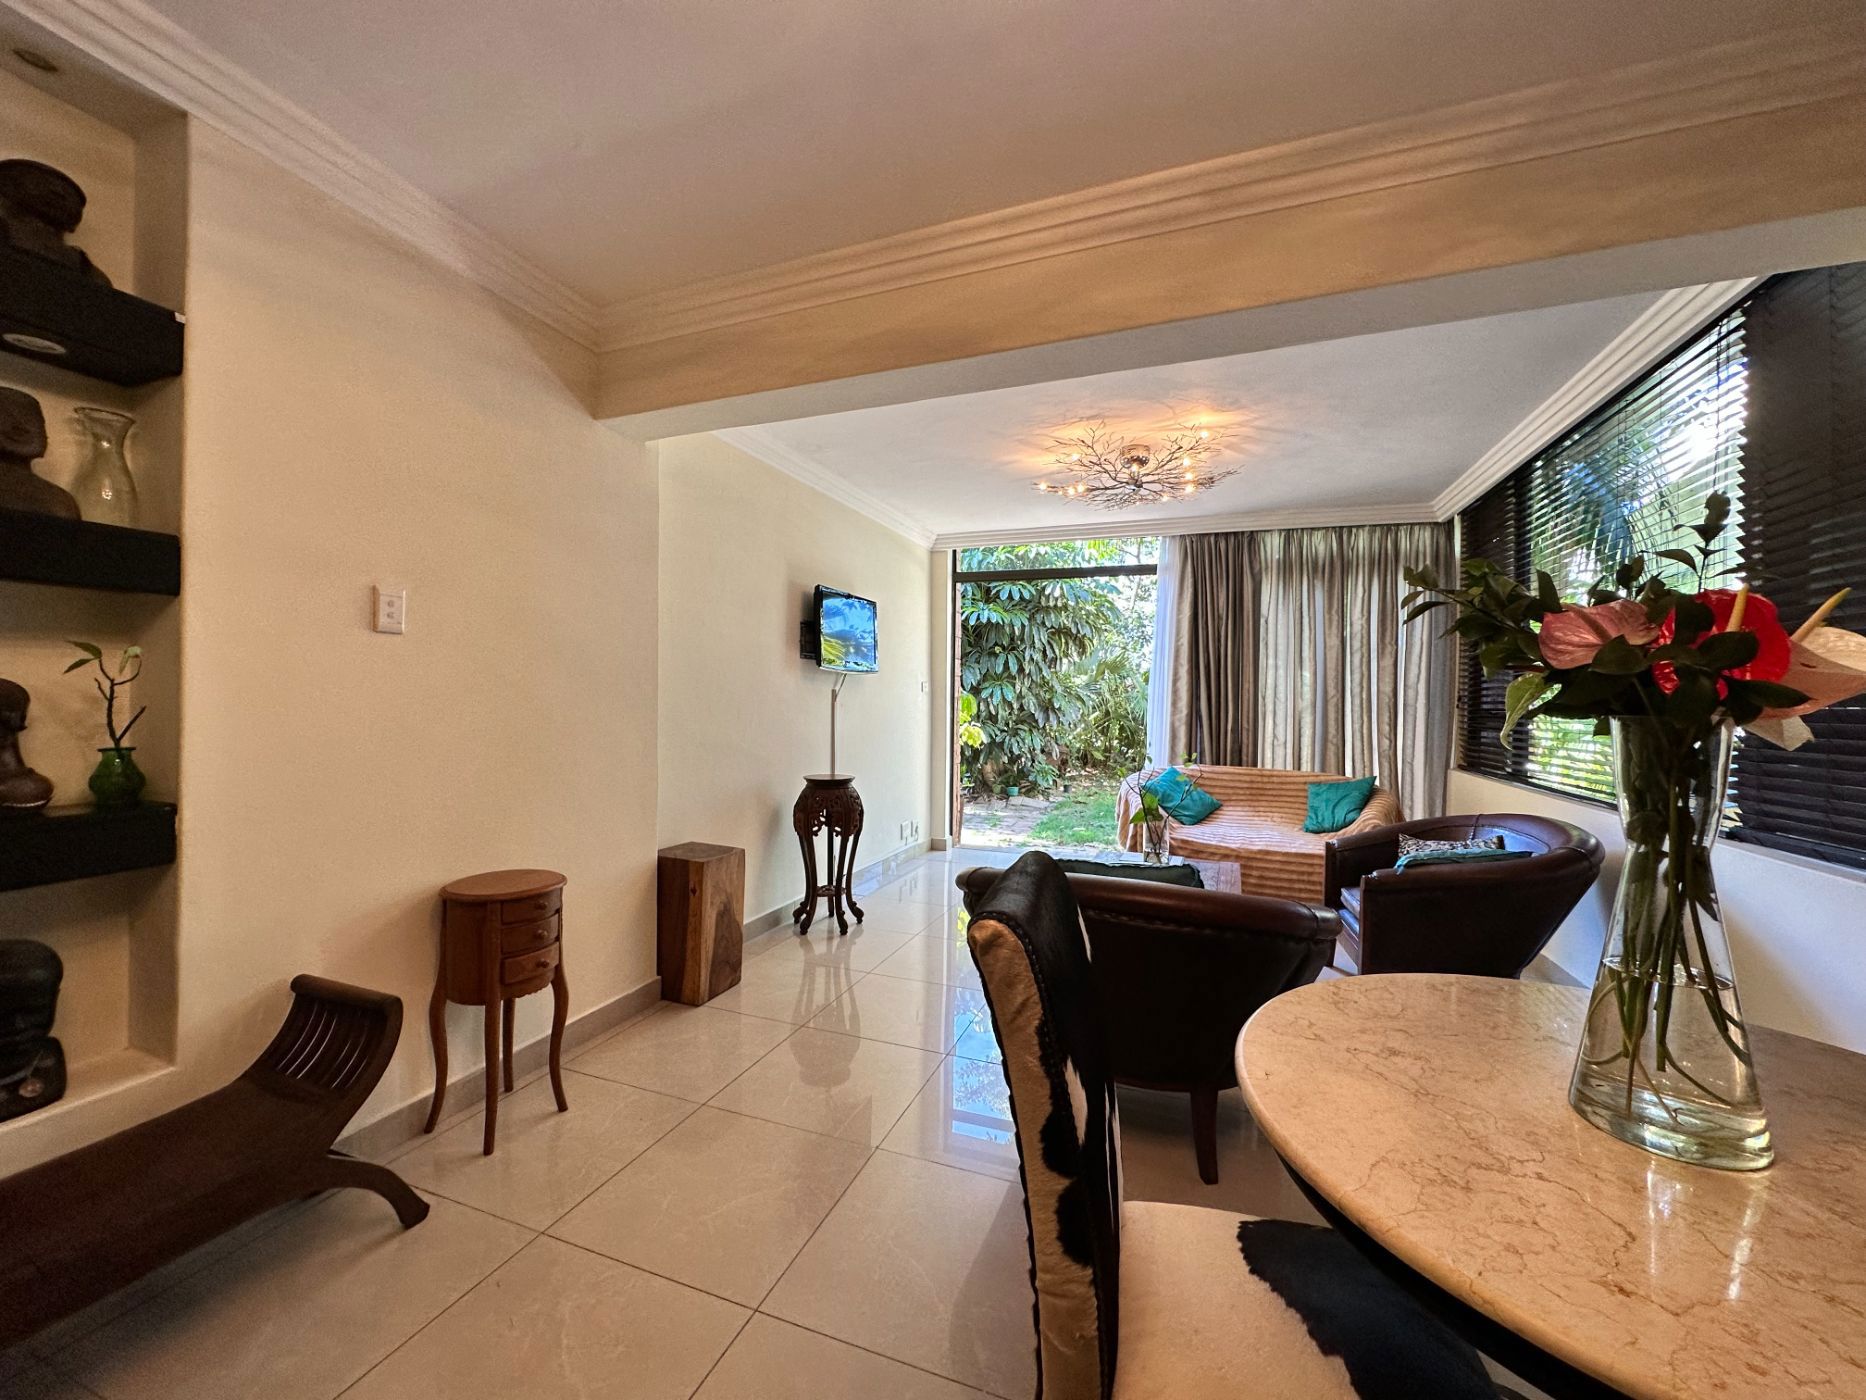 1 bedroom bachelor apartment to rent in Ballito